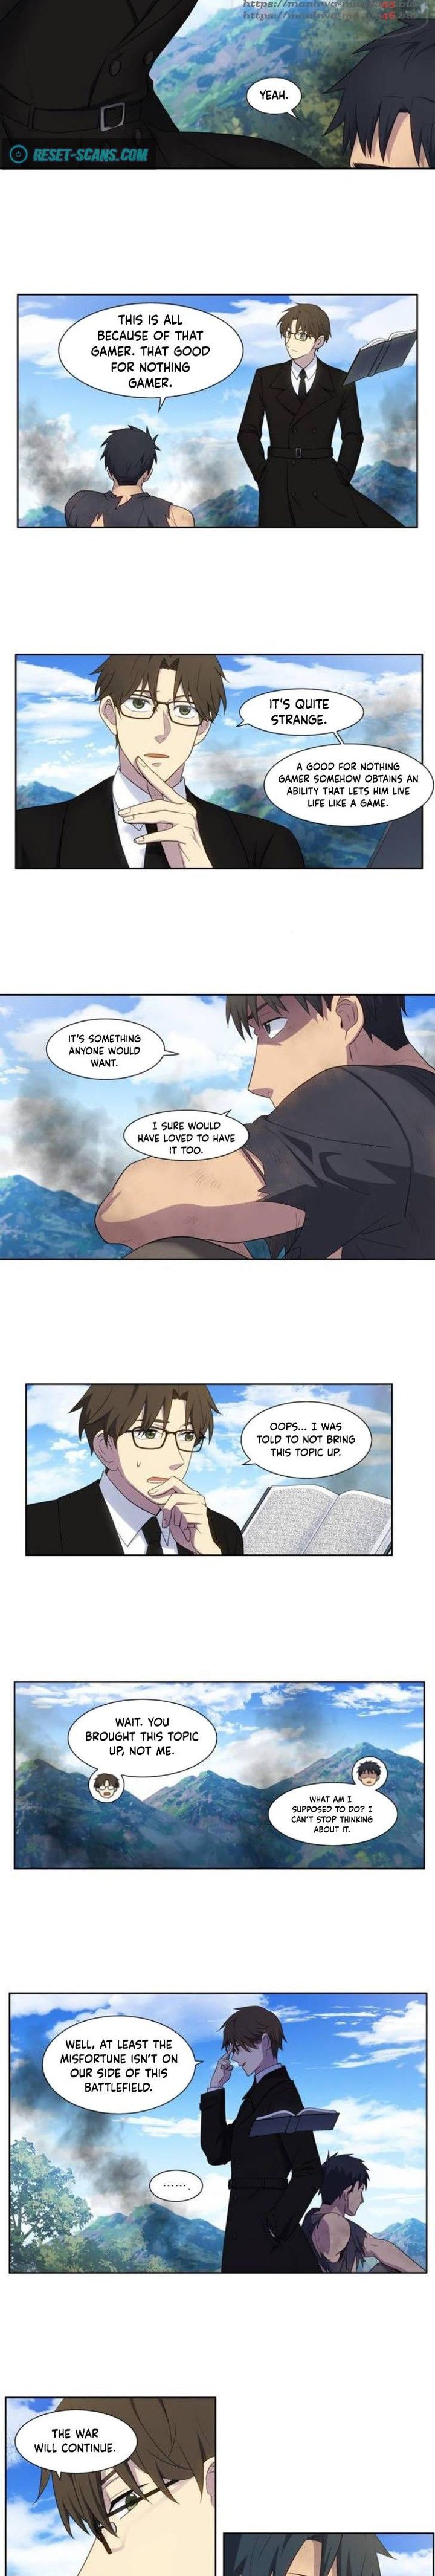 the-gamer-chap-382-5